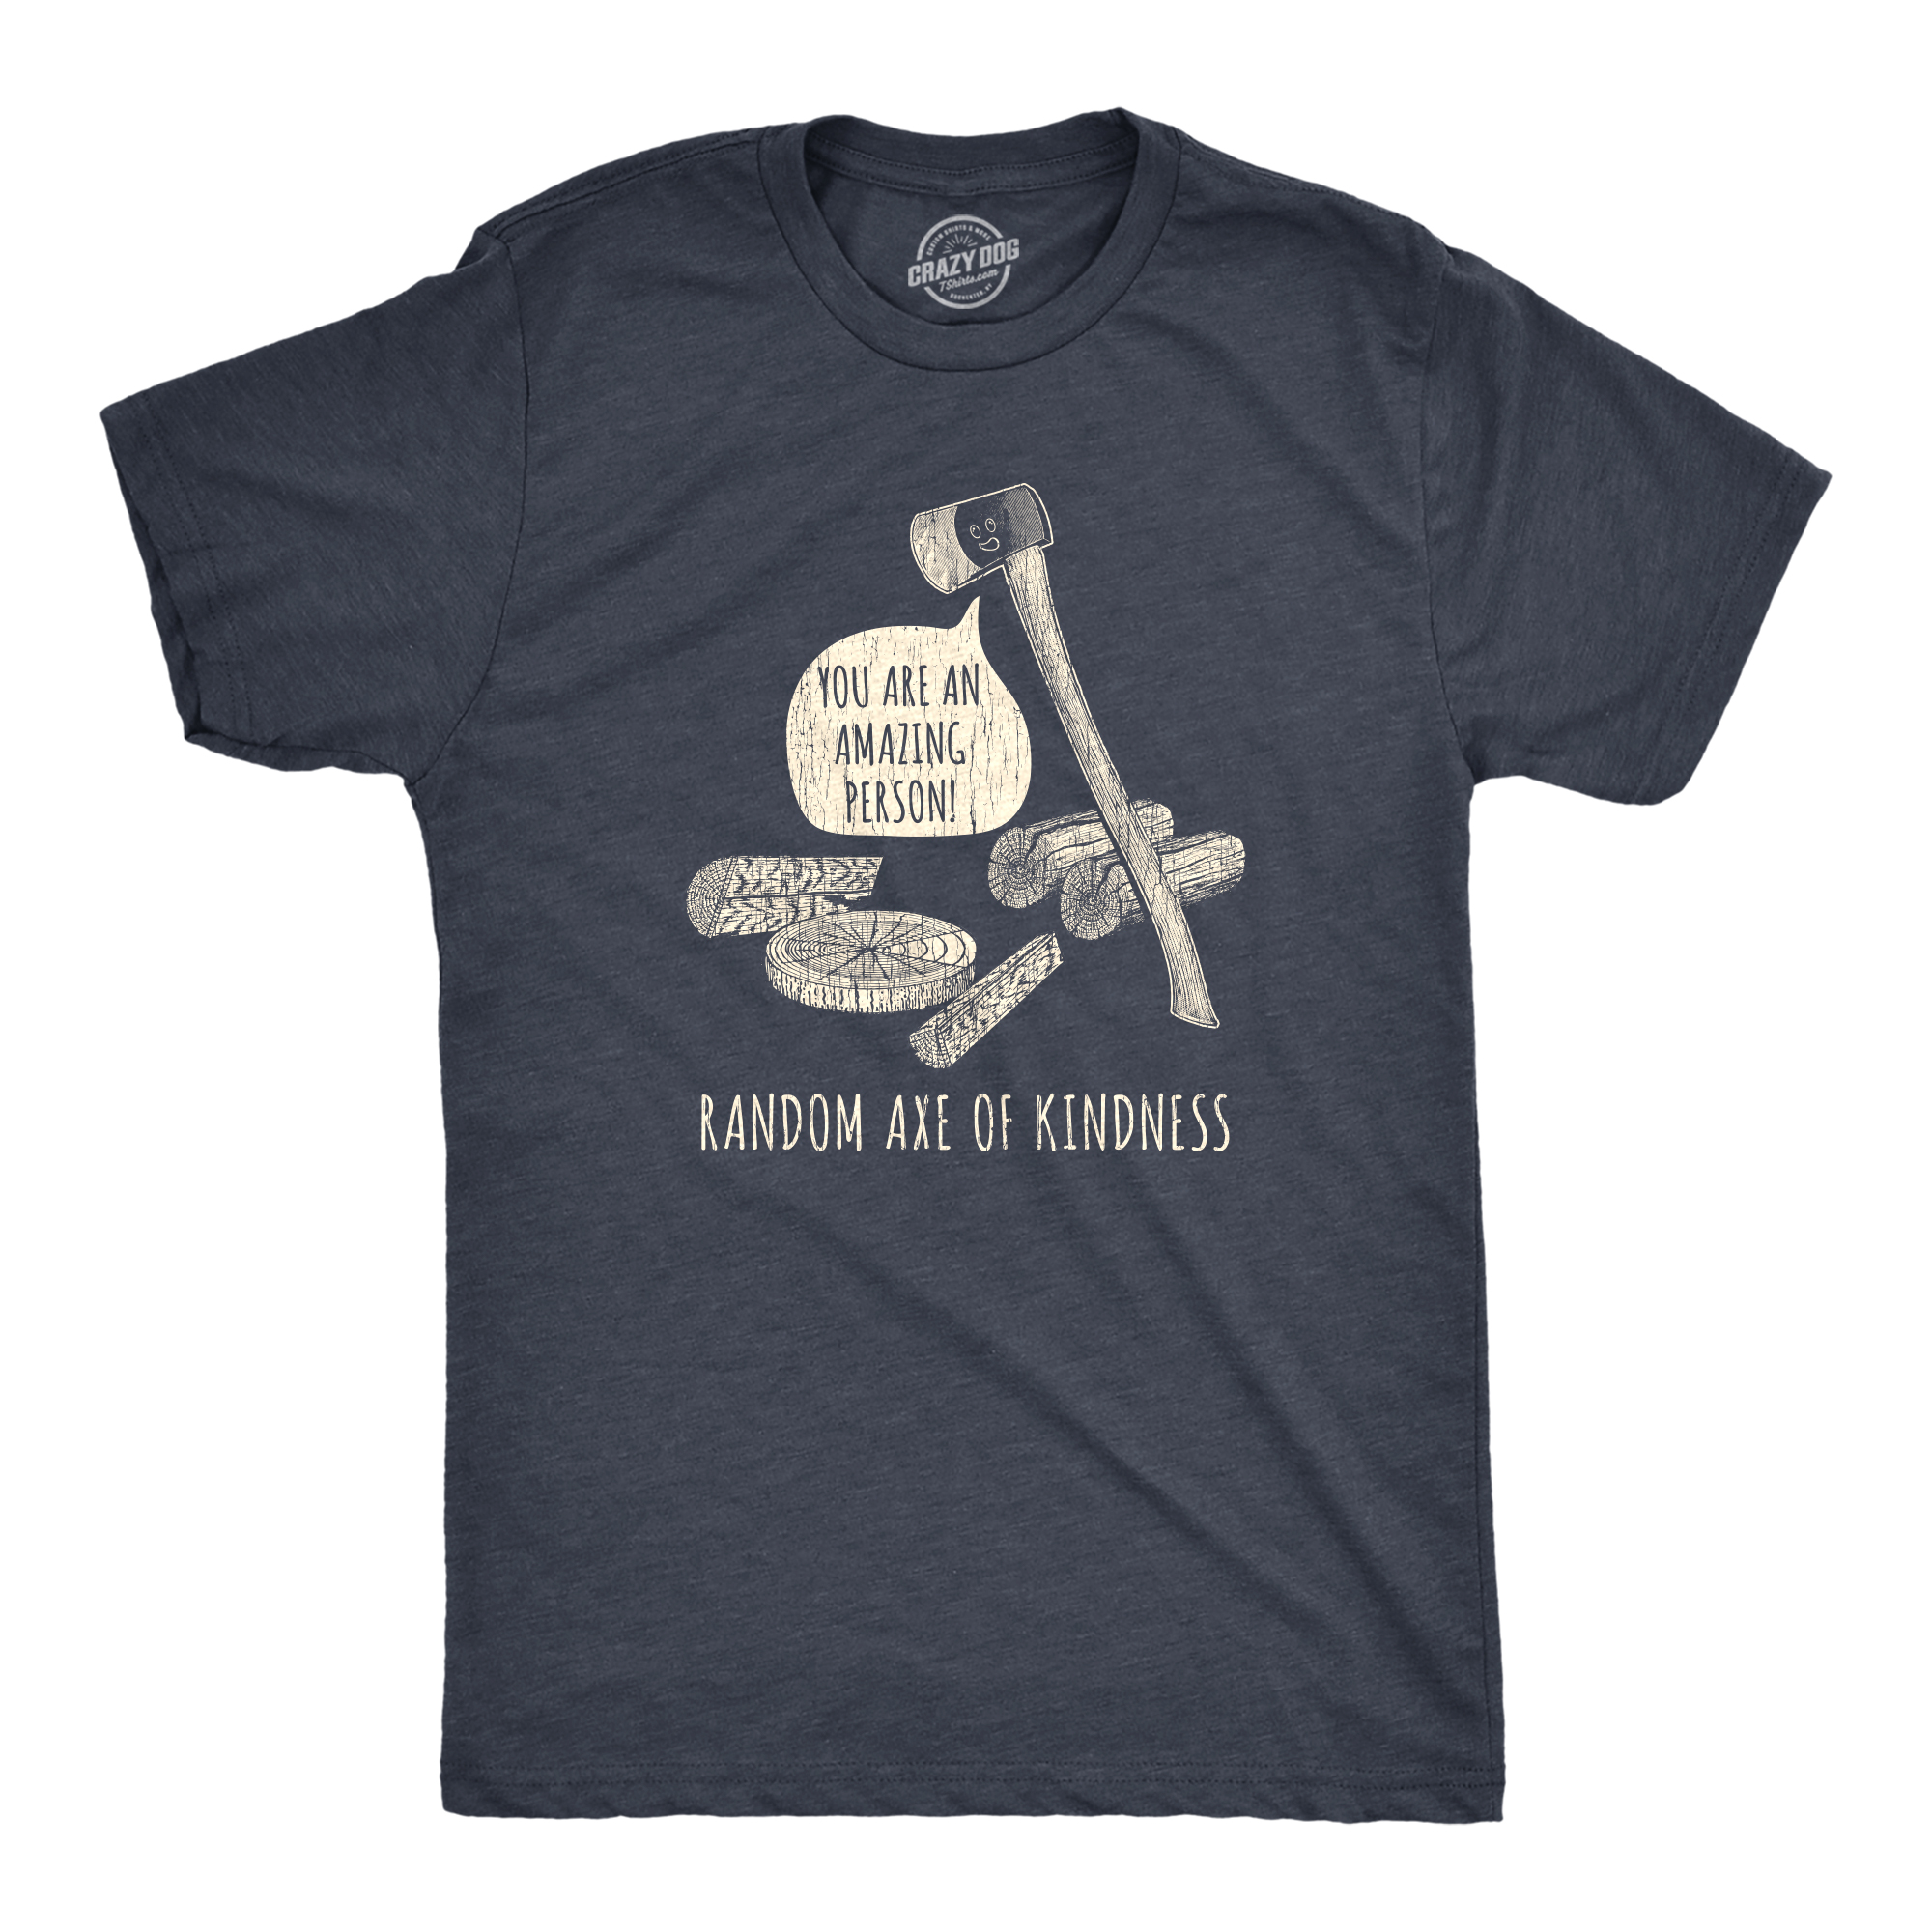 Crazy Dog Tshirts Mens Random Axe Of Kindness Tshirt Funny Complement Tools Graphic Novelty Tee